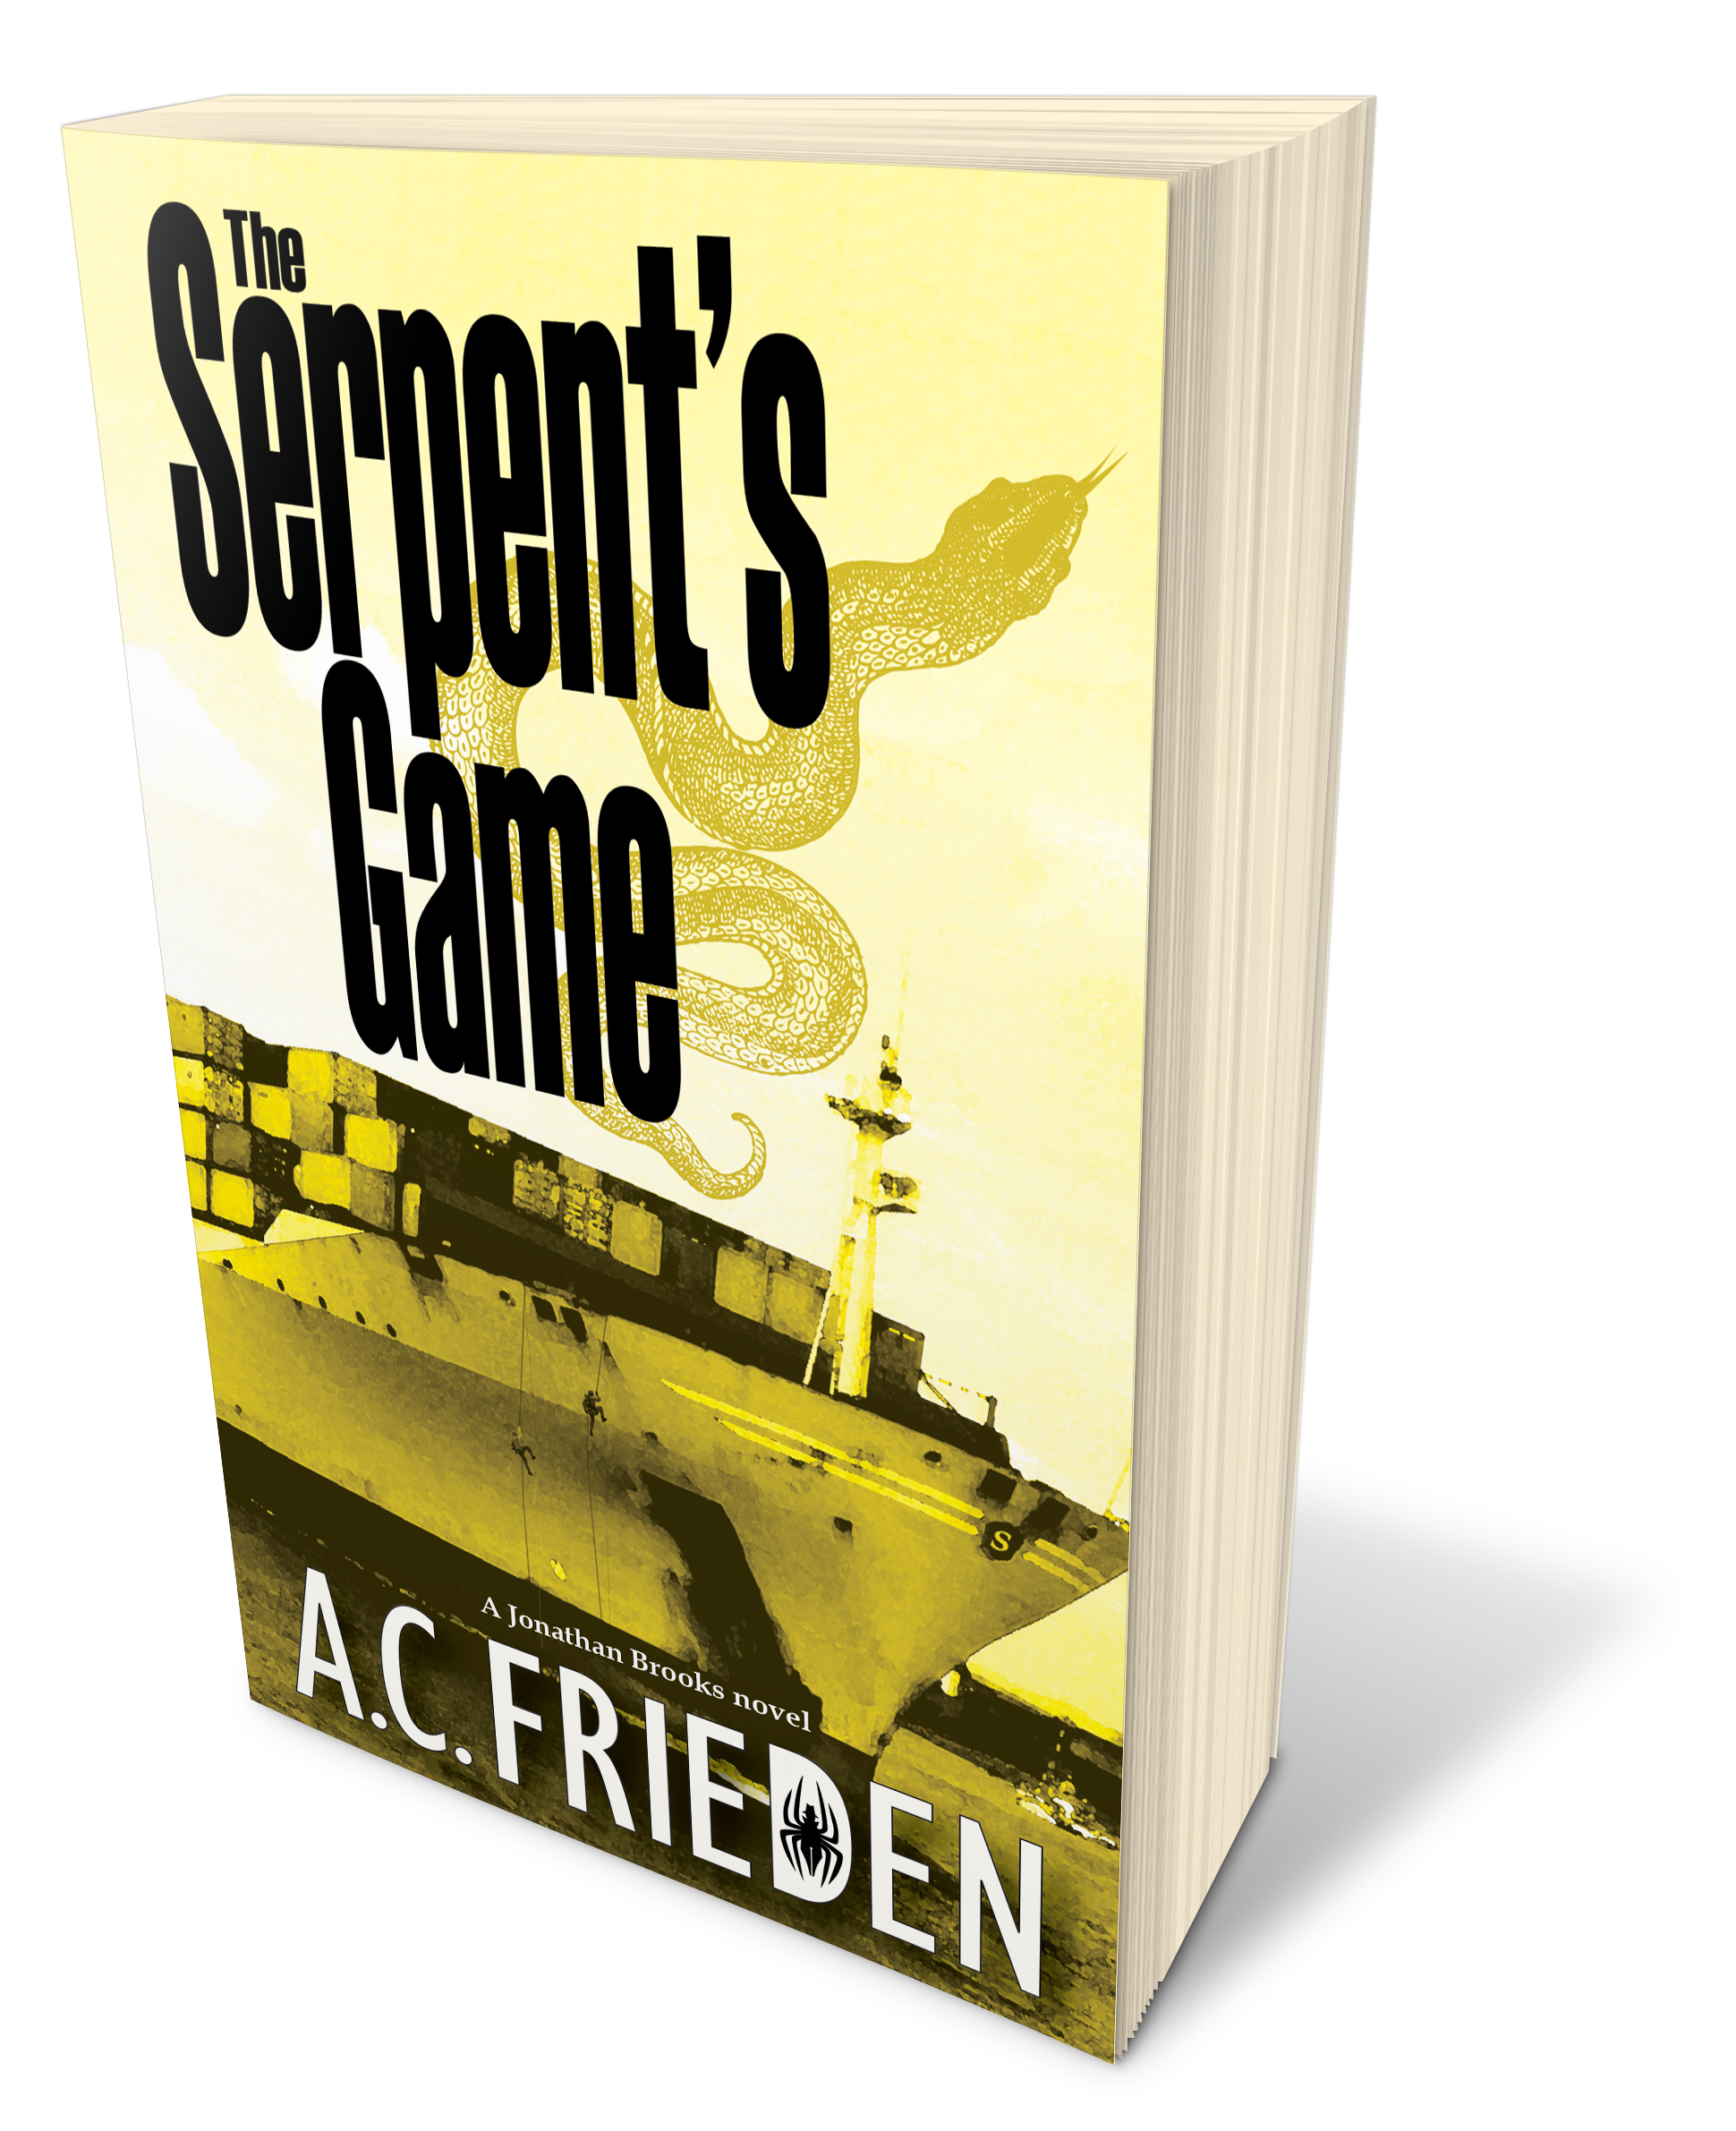 The Serpent's game